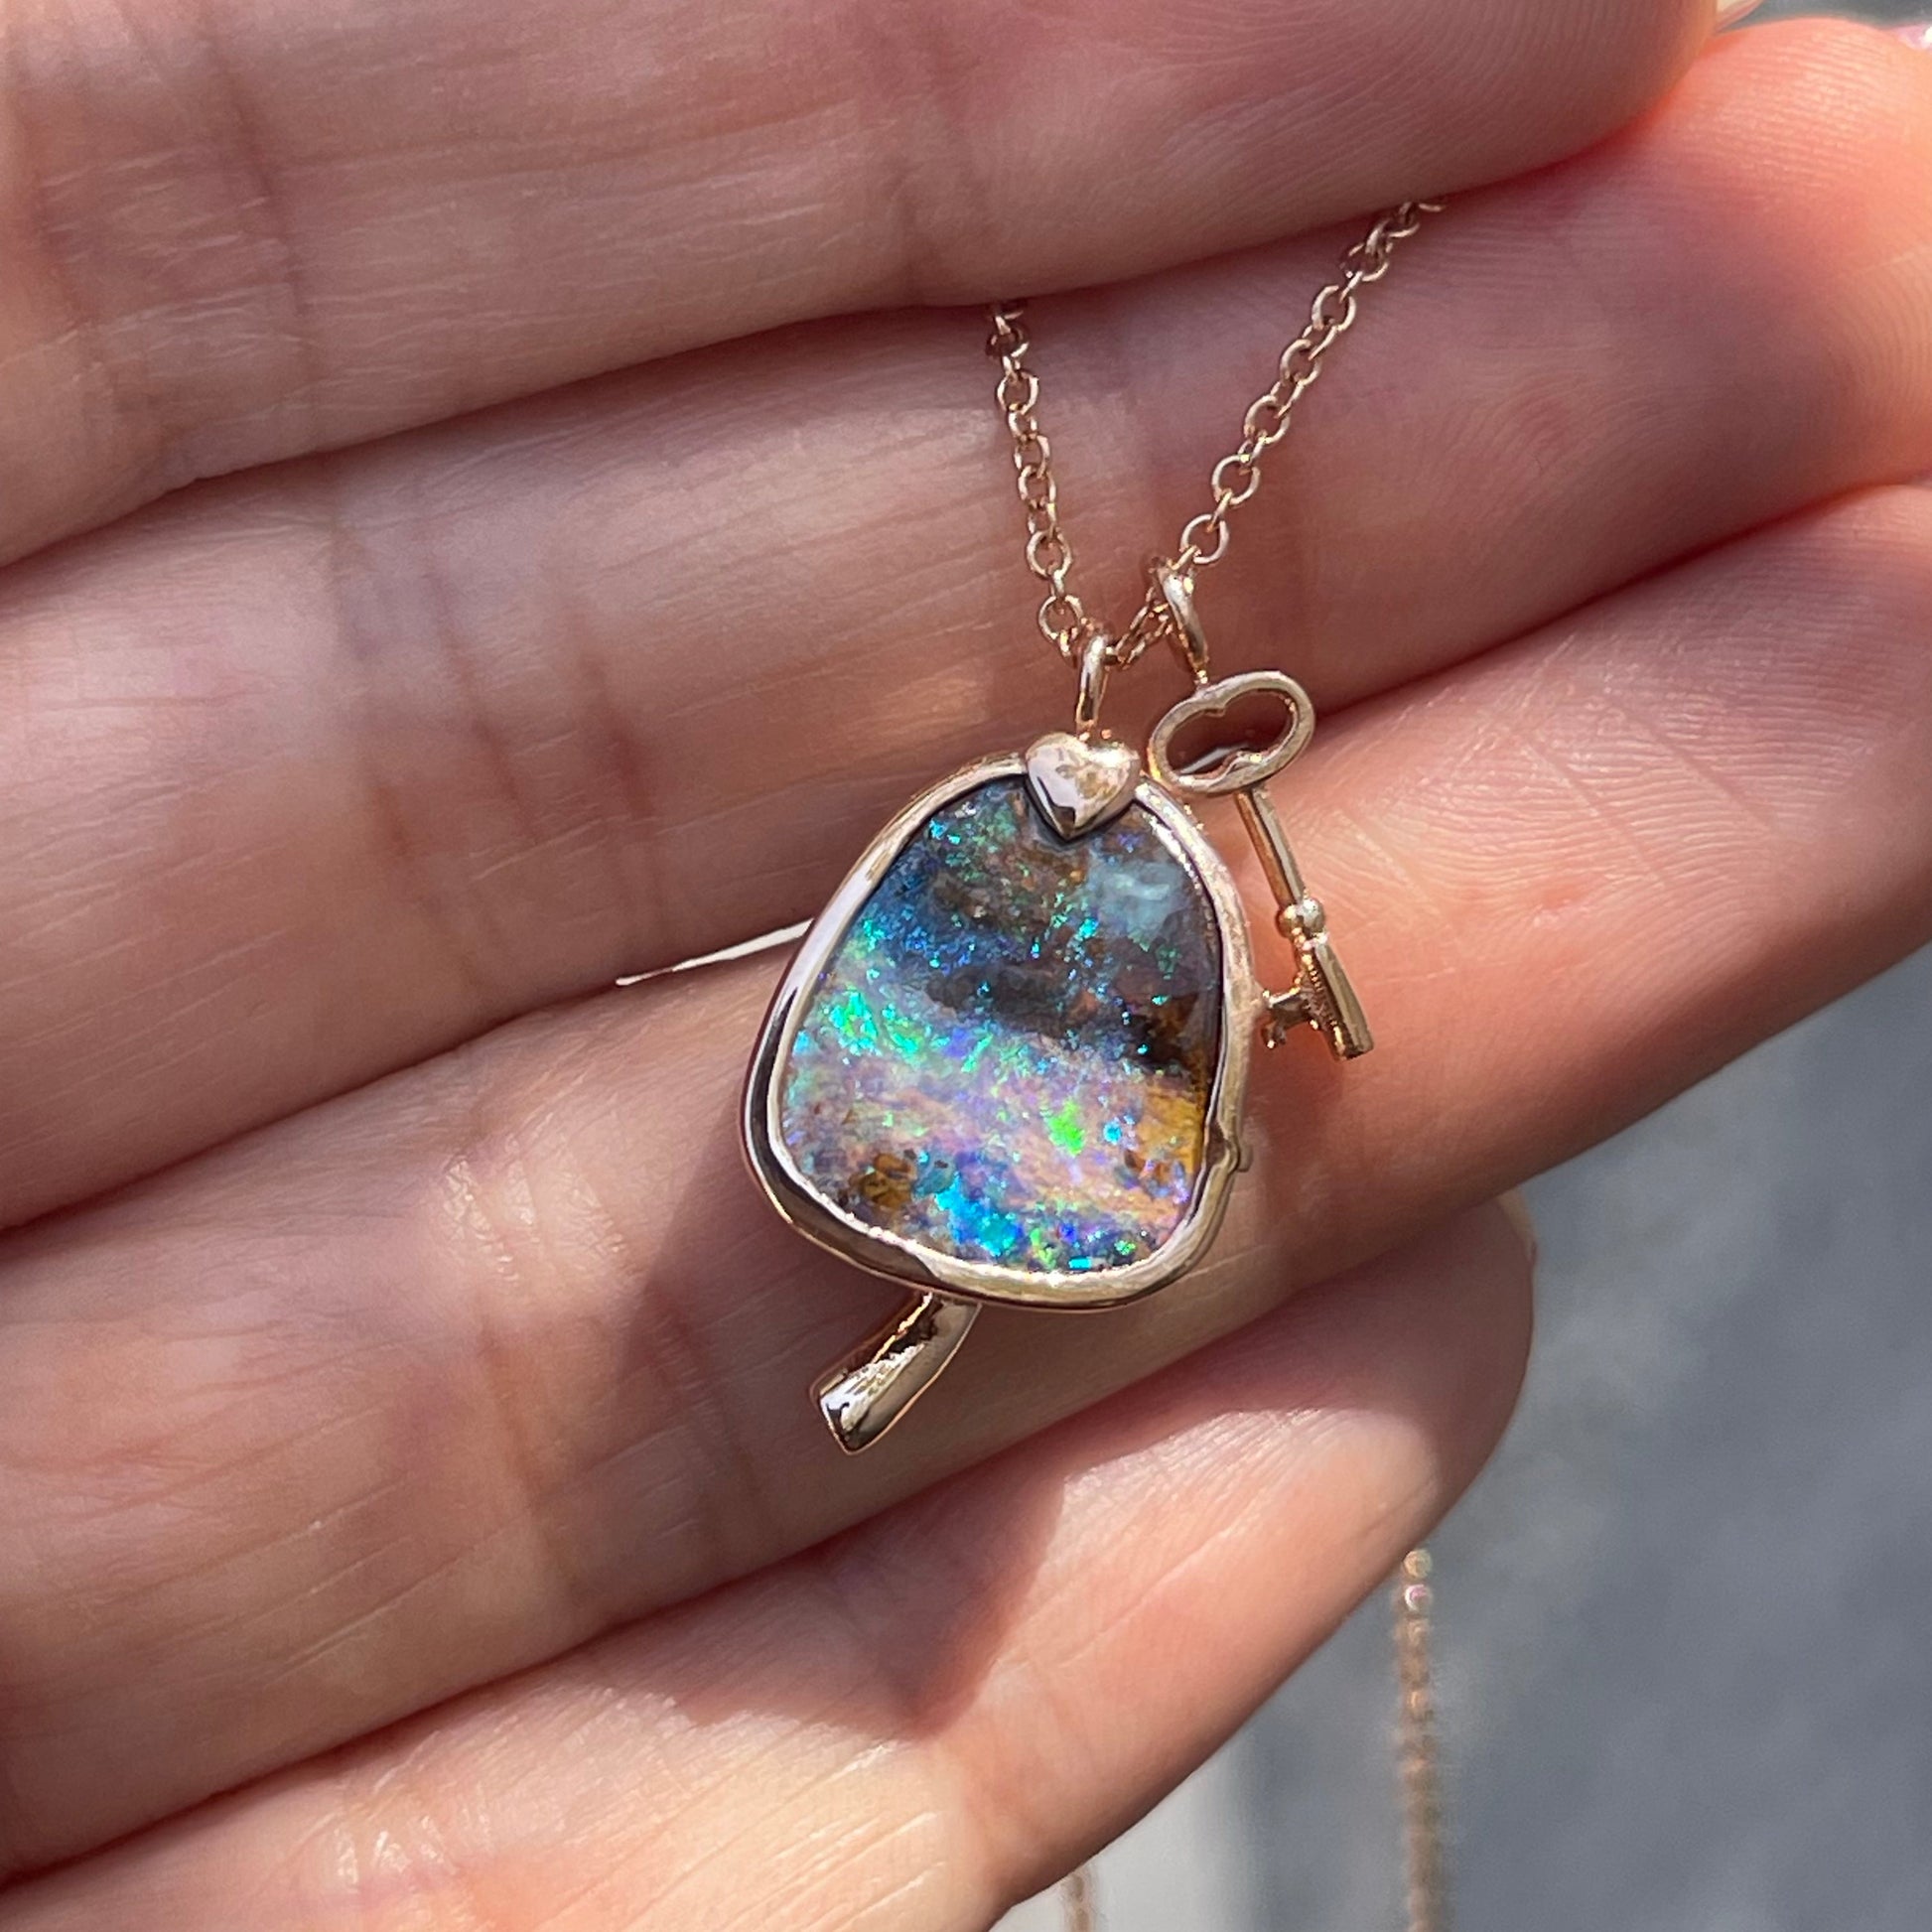 An Australian Opal Necklace by NIXIN Jewelry. A unique opal necklace with emeralds set in 14k rose gold.